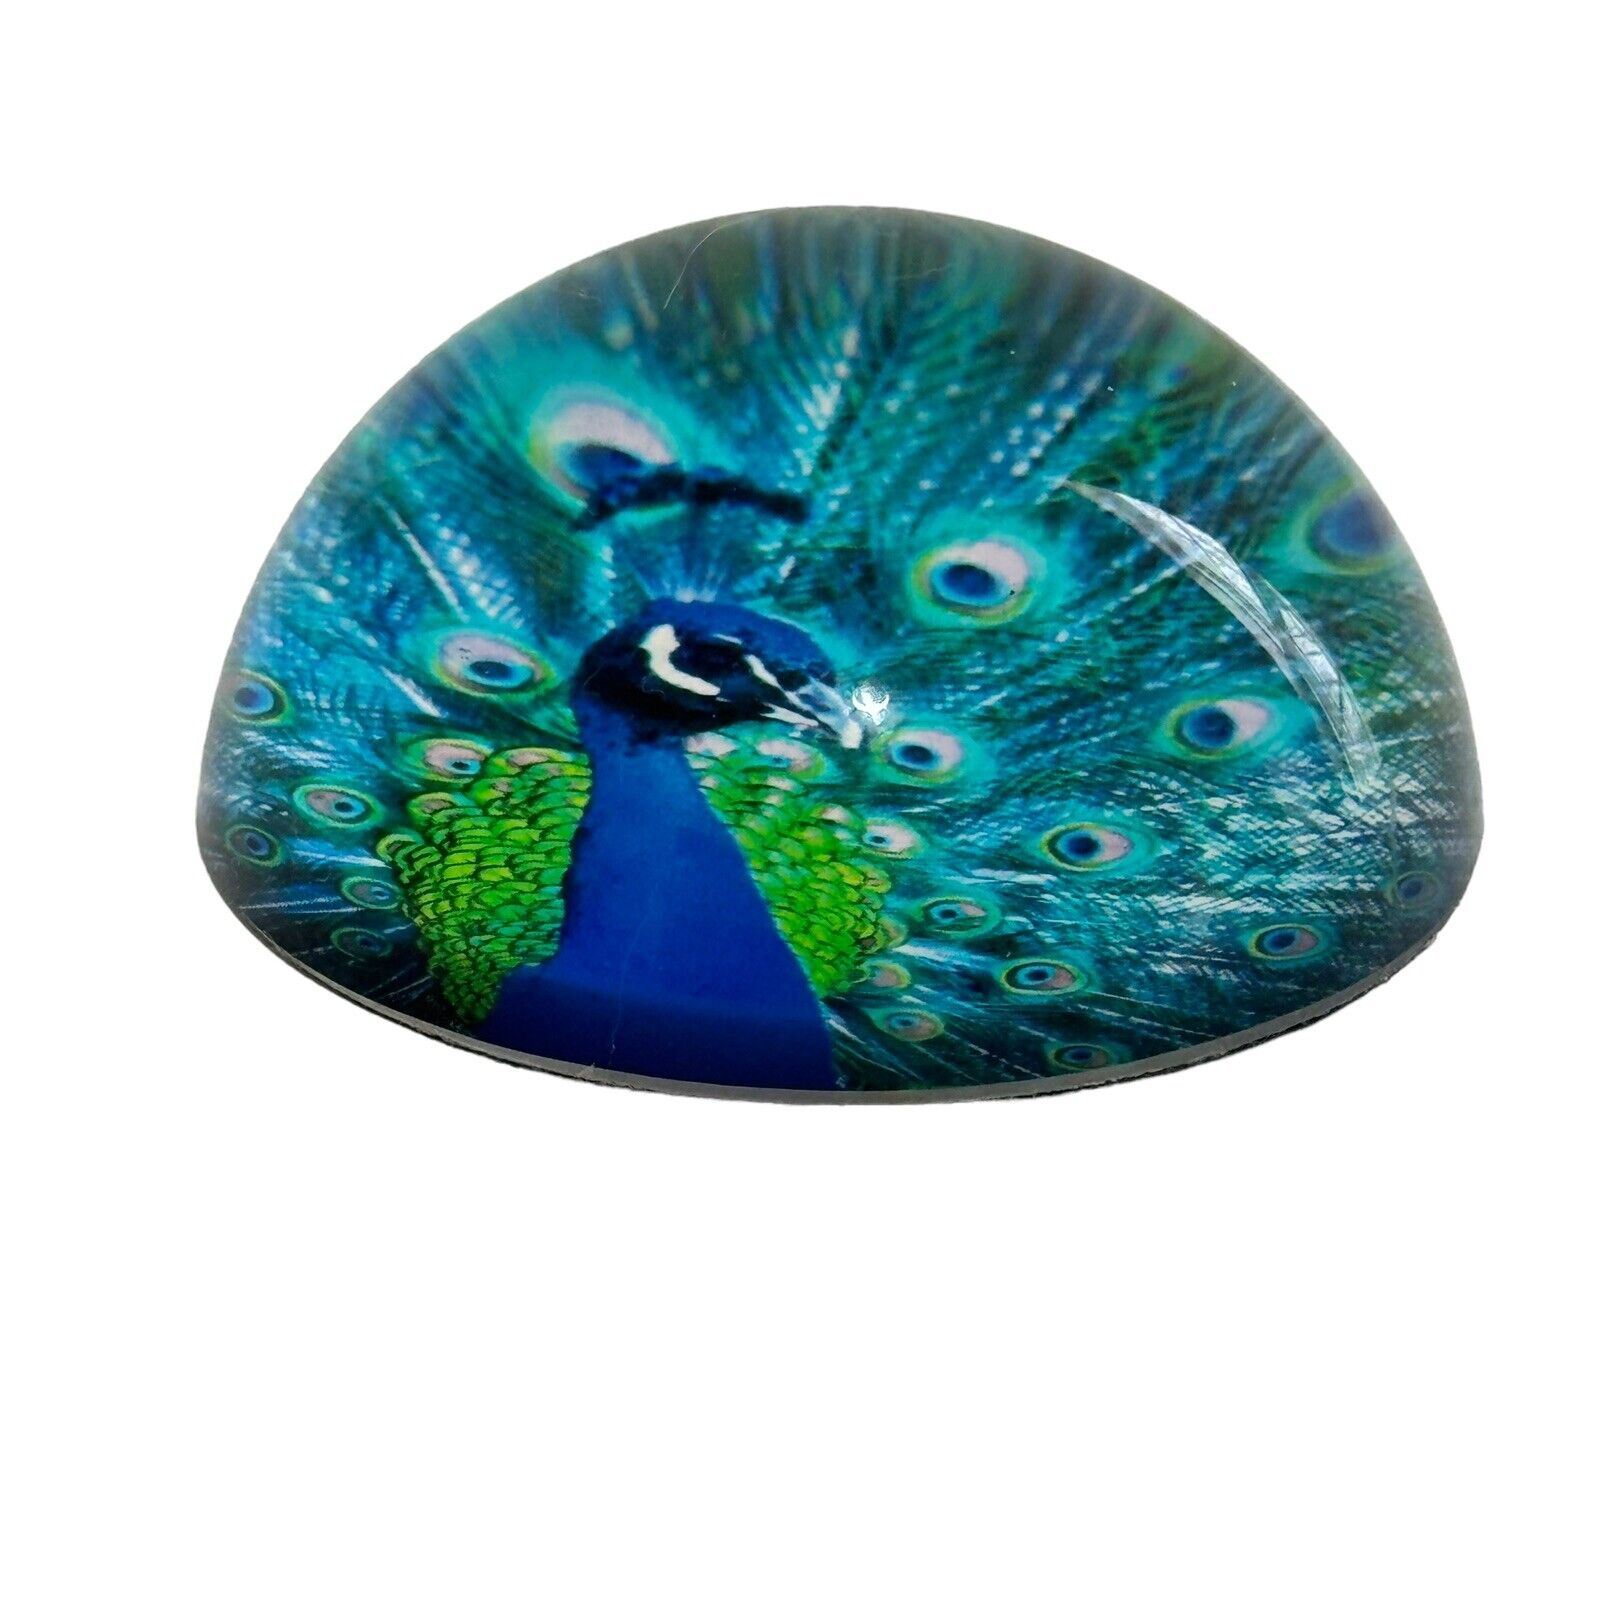 Peacock Art Glass Paperweight Vintage Desk Top Colorful Office Round Dome Bird